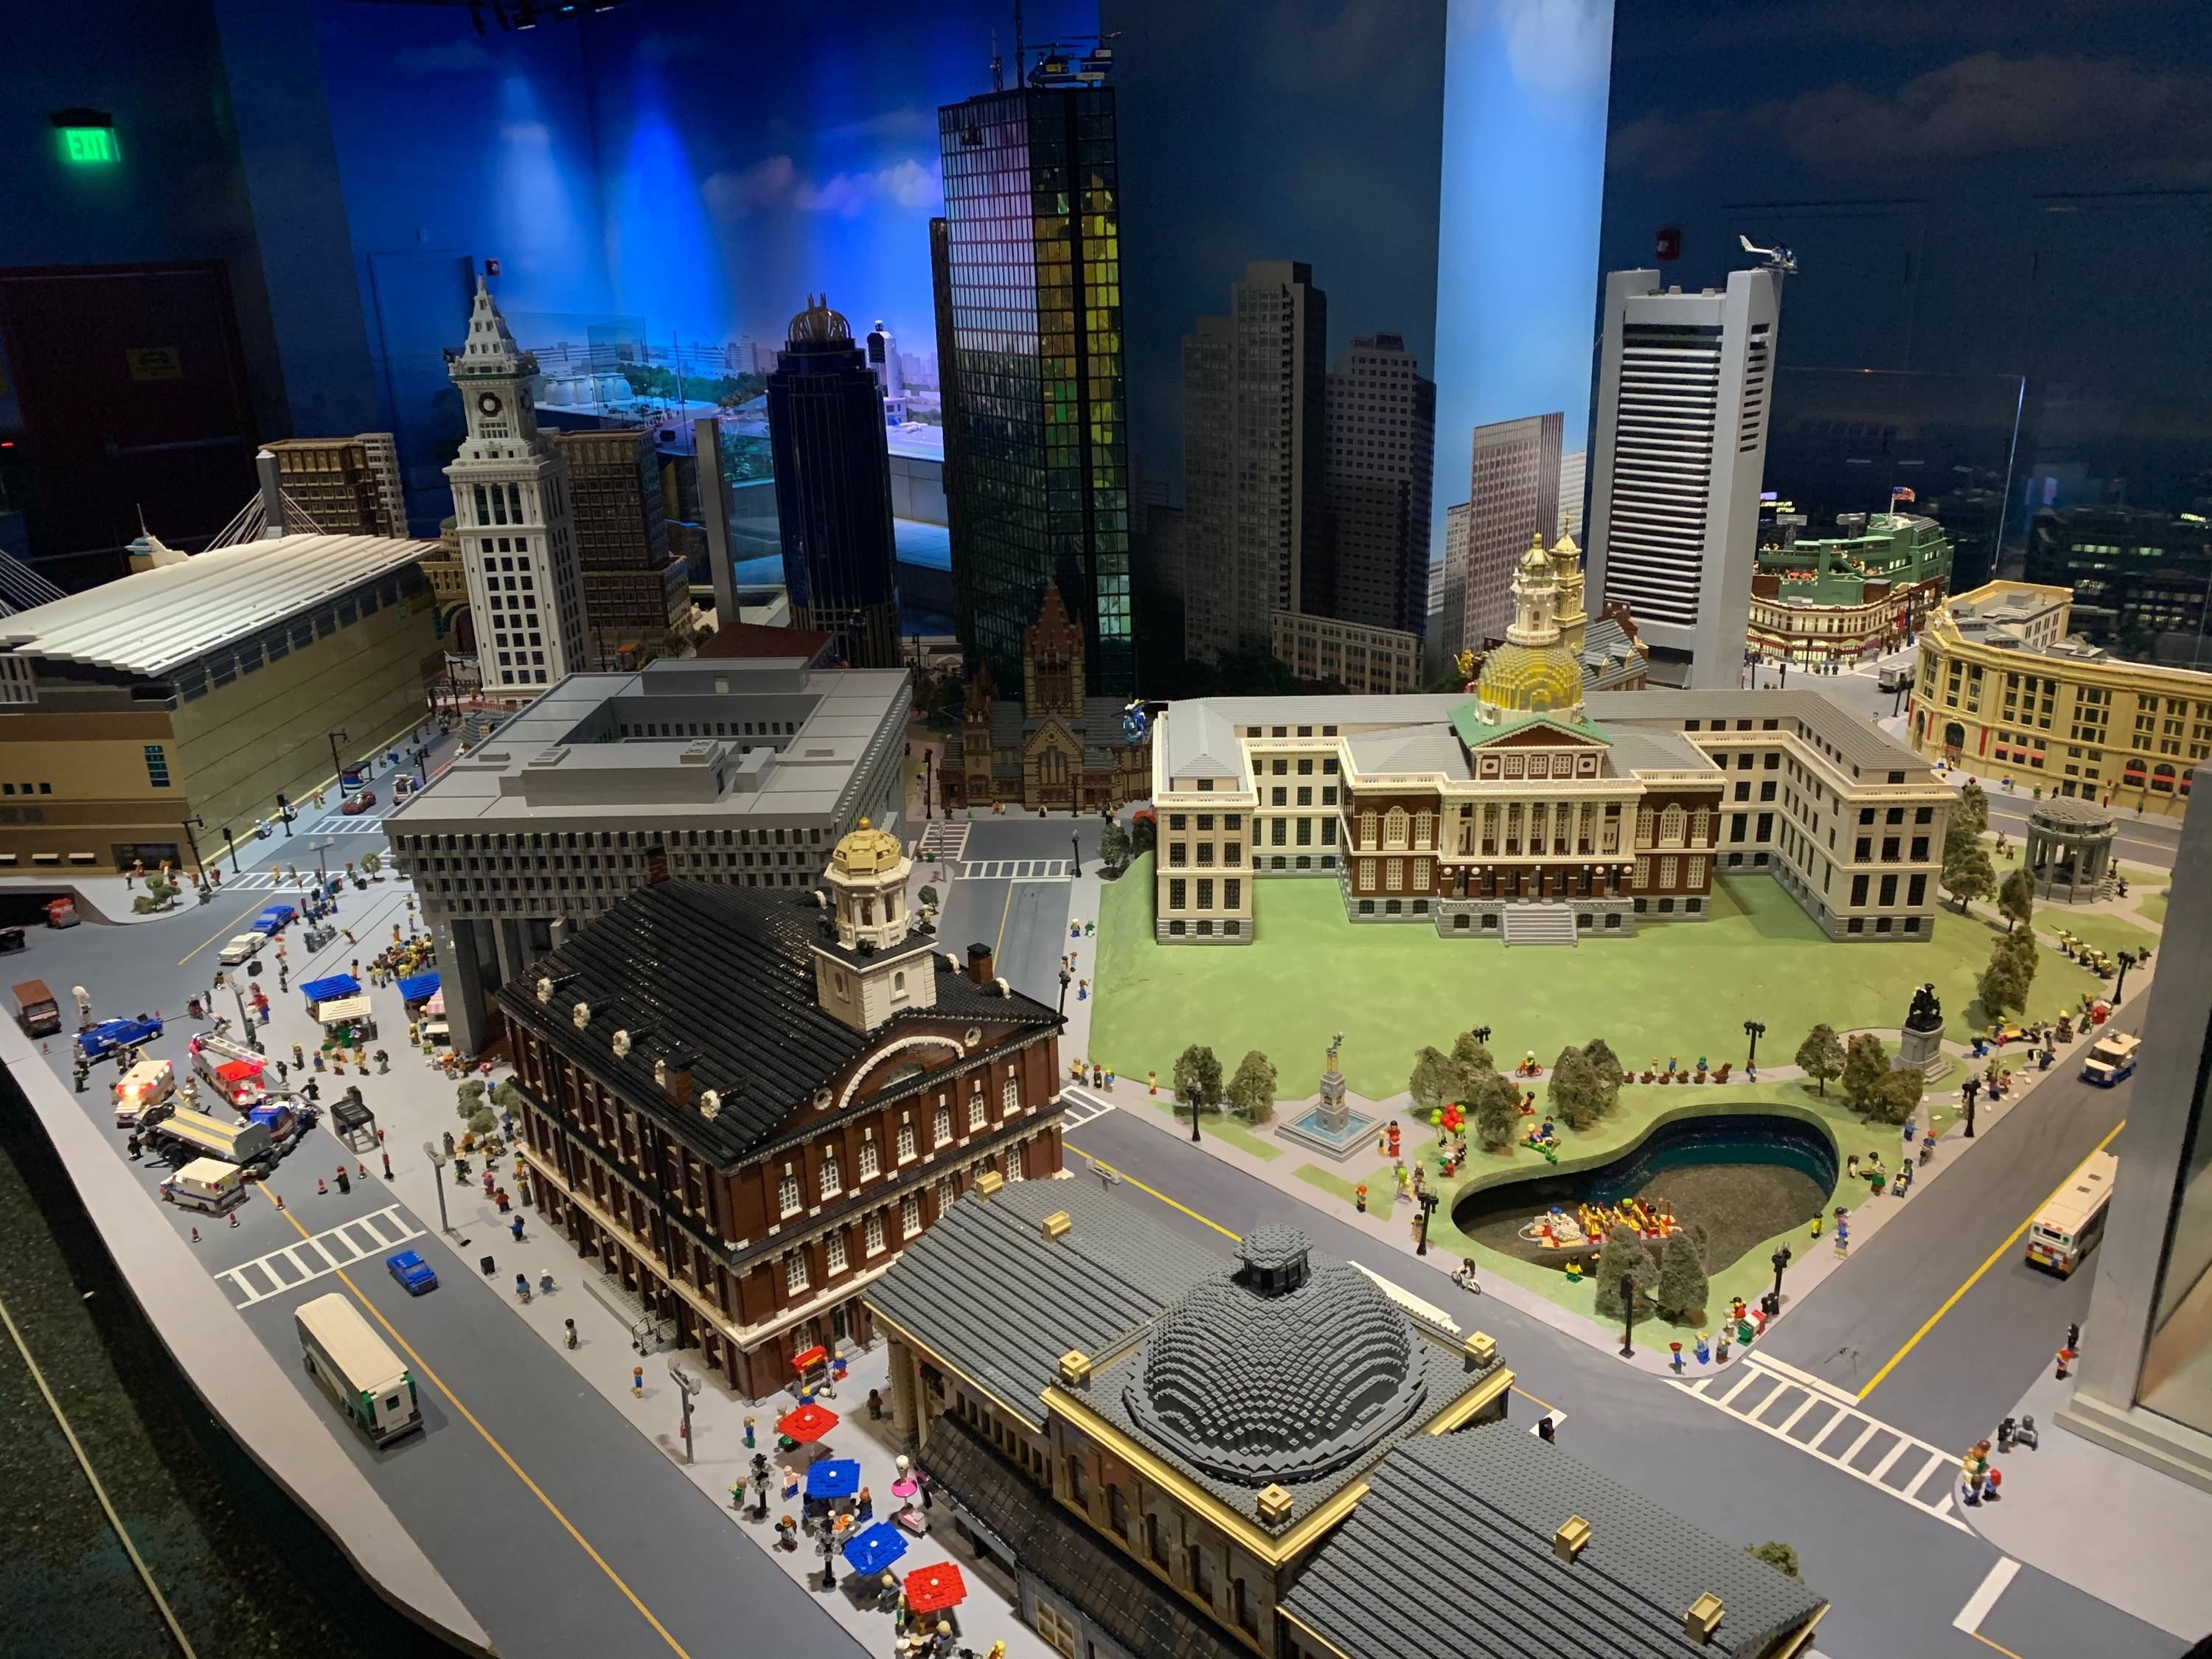 Lego's moving its HQ to Boston